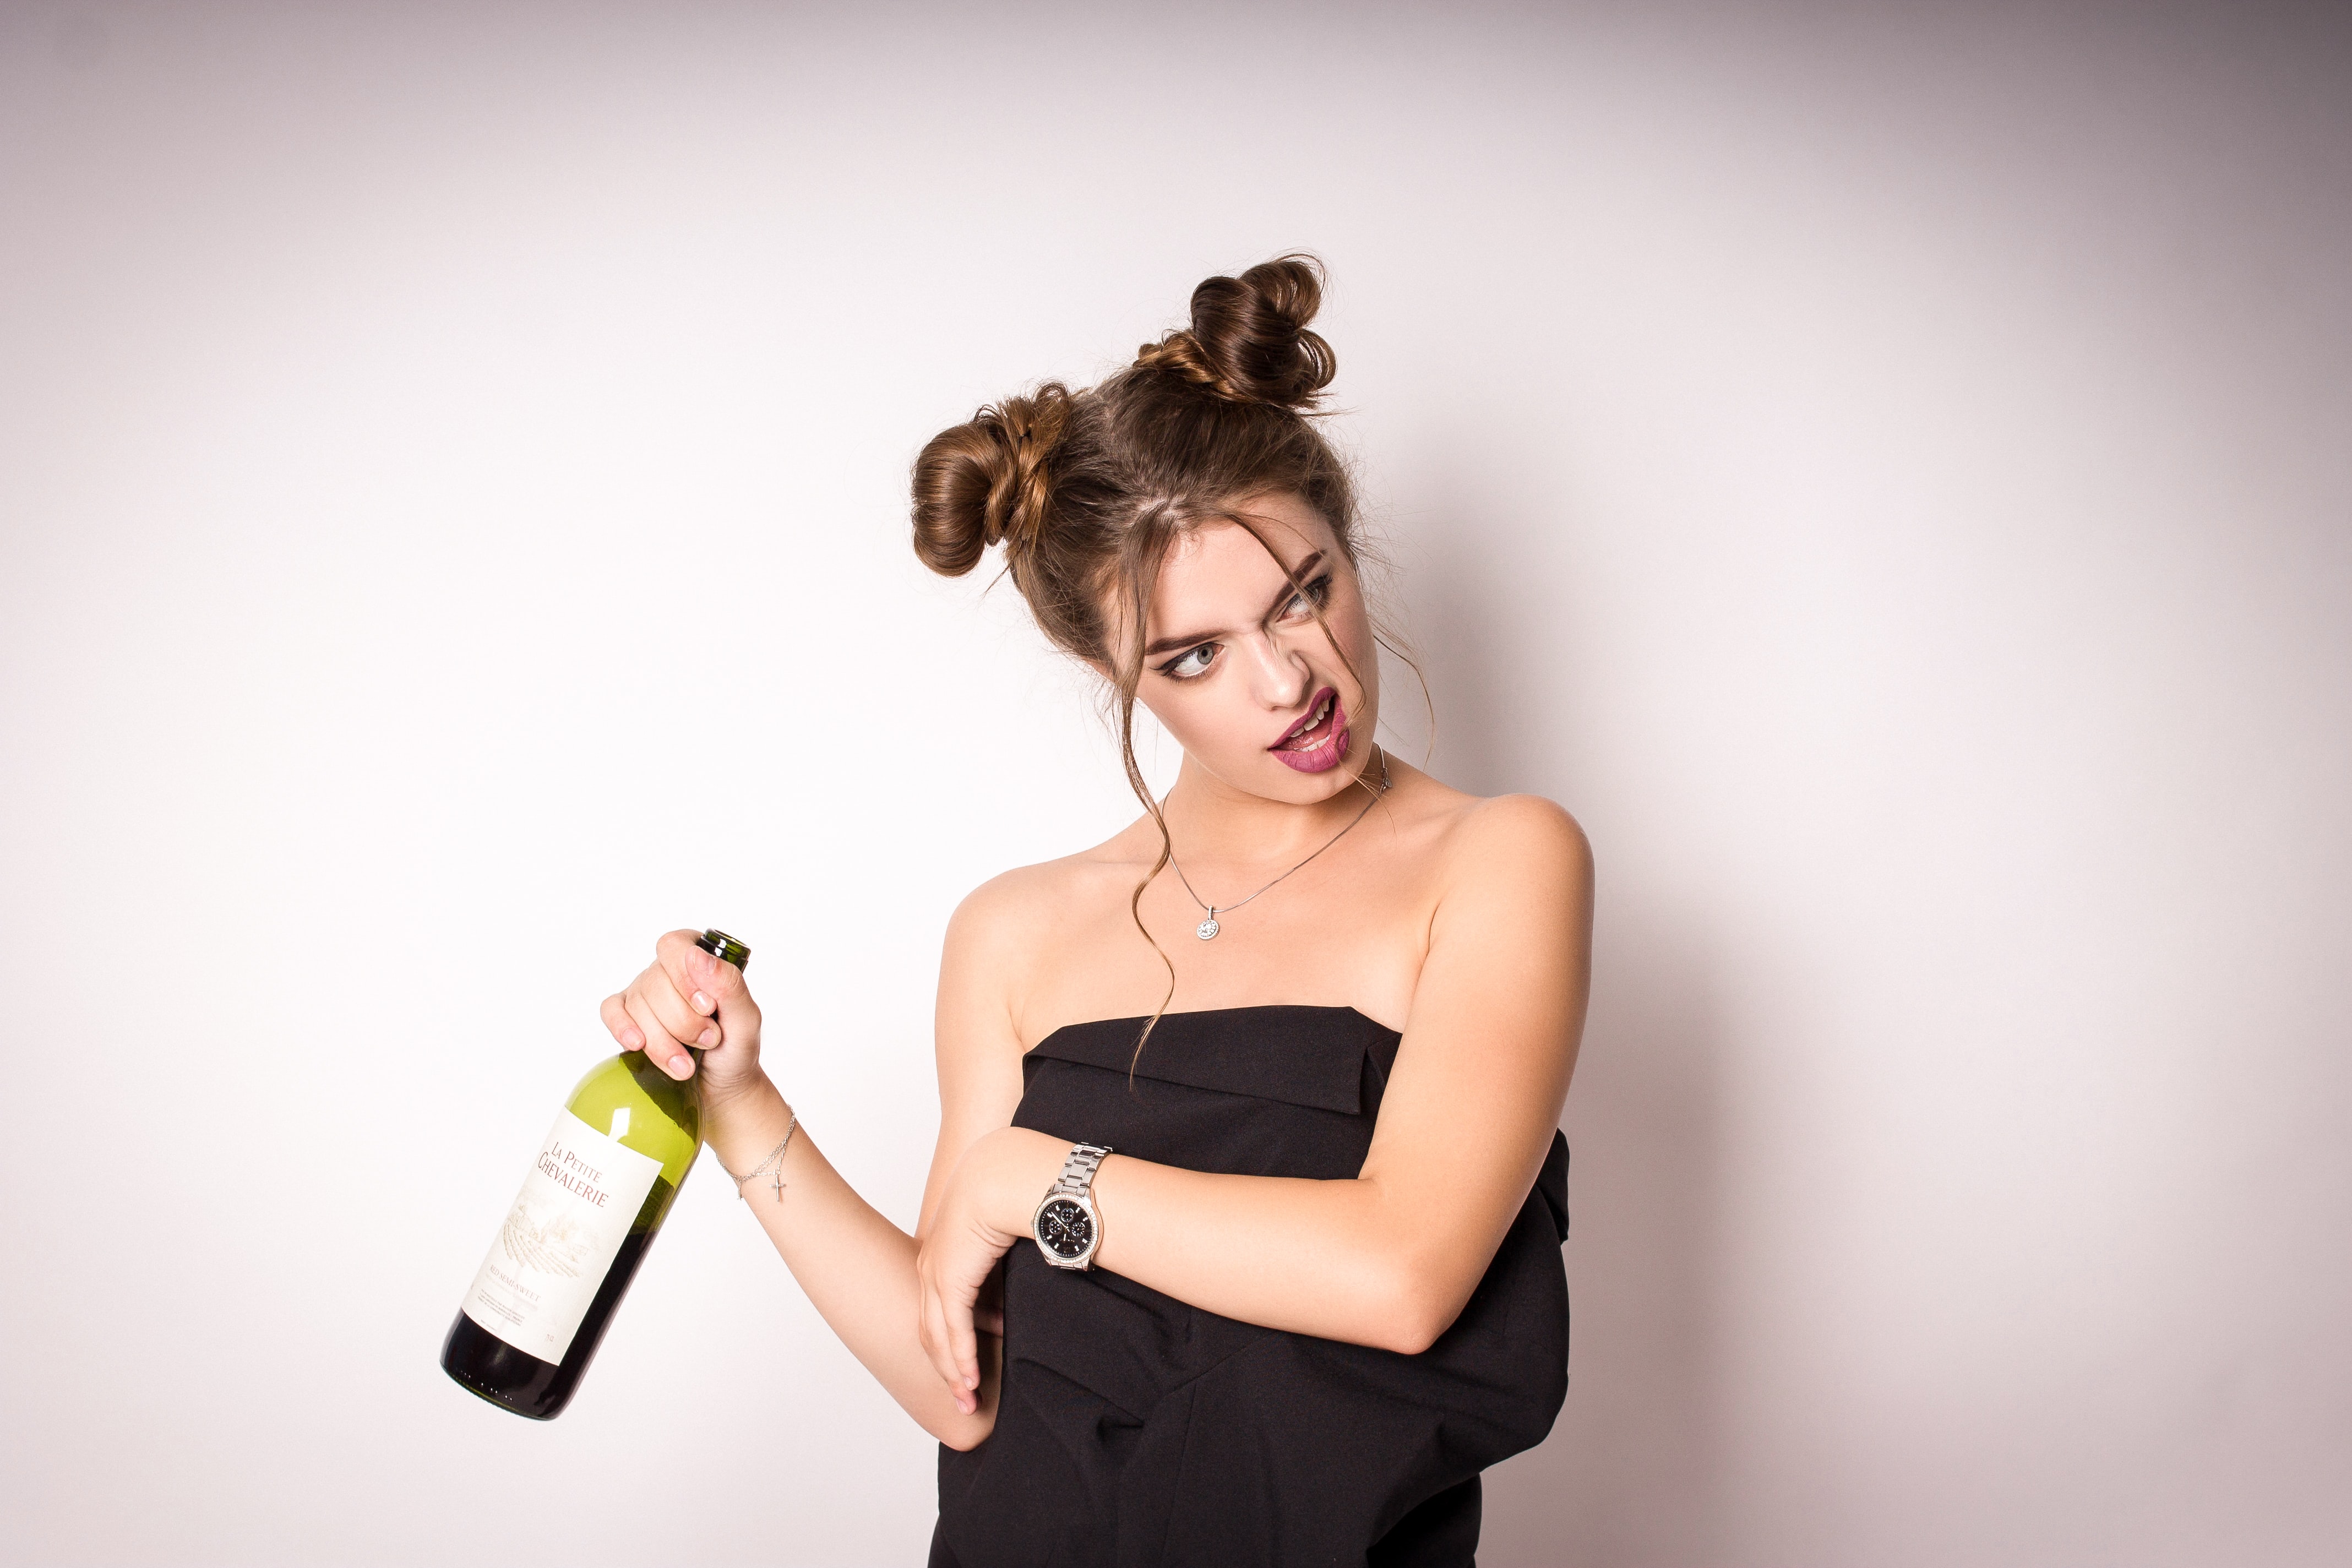 Woman in black dress with wine bottle and funny expression; image by Andrey Zvyagintsev, via Unsplash.com.